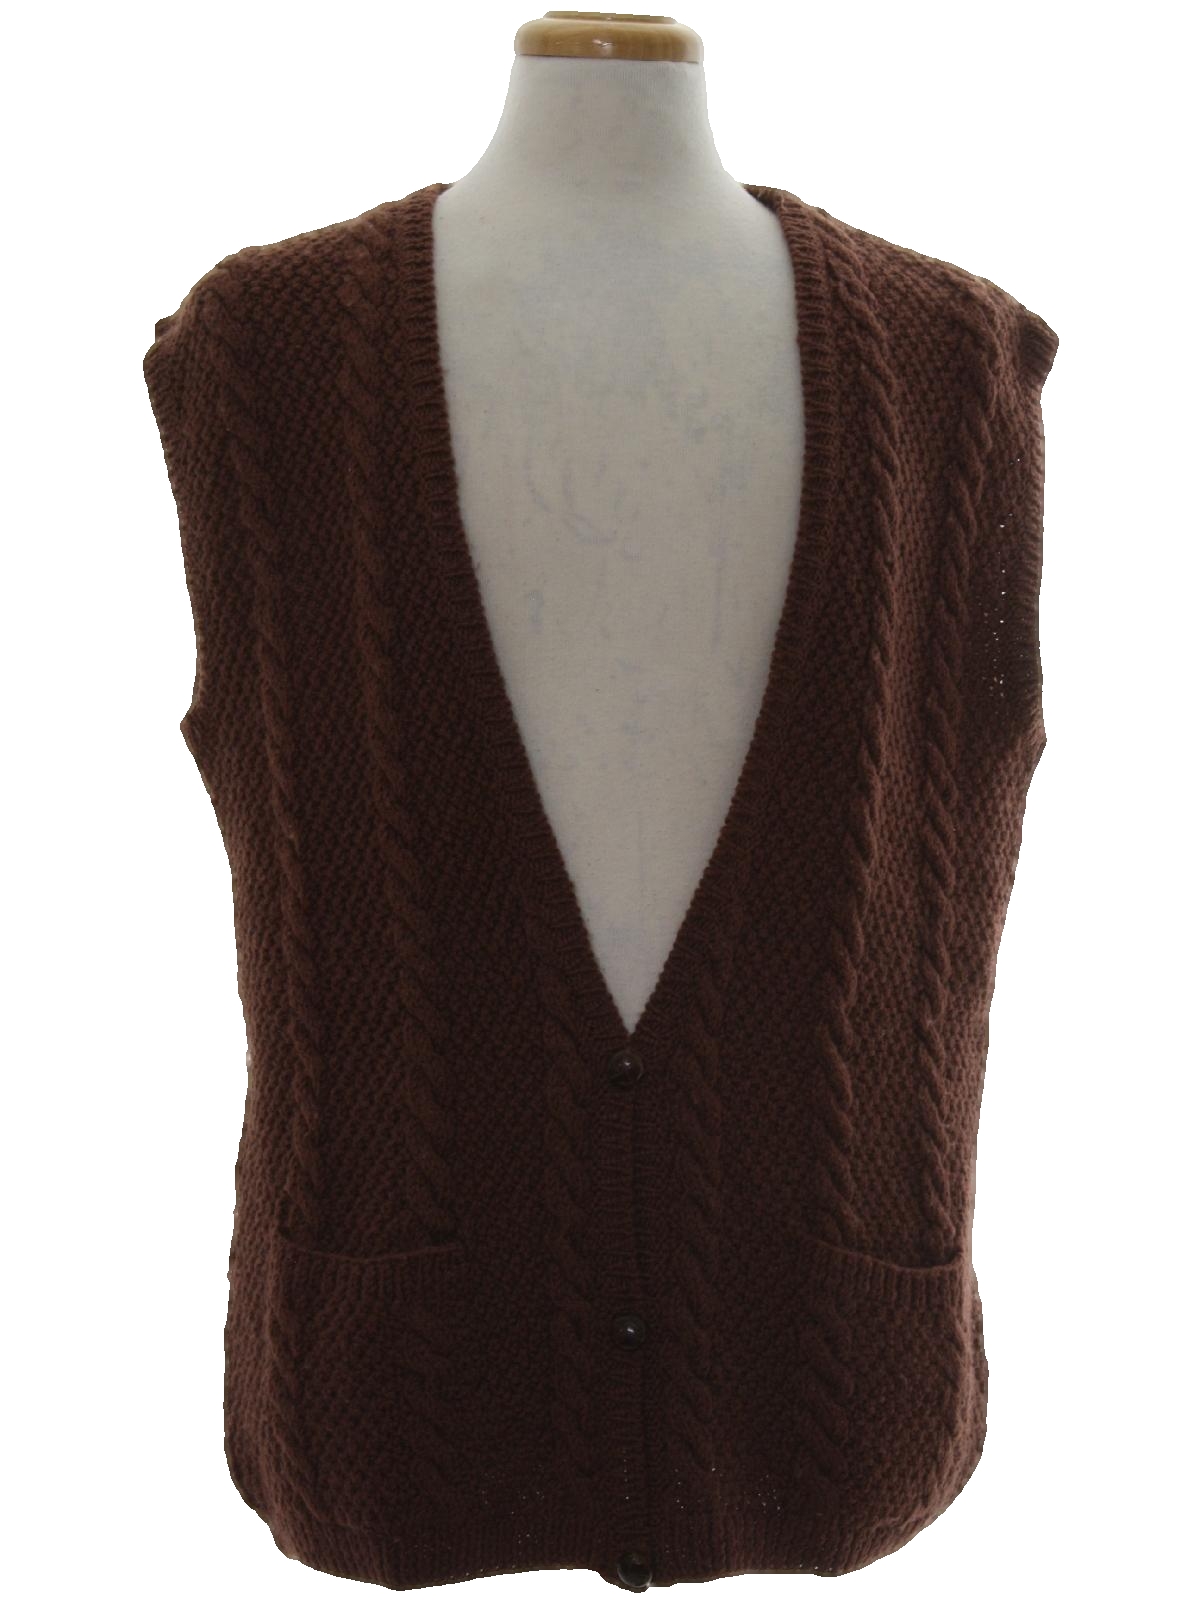 1960's Retro Sweater: Late 60s -Missing Label- Mens brown, cable knit ...